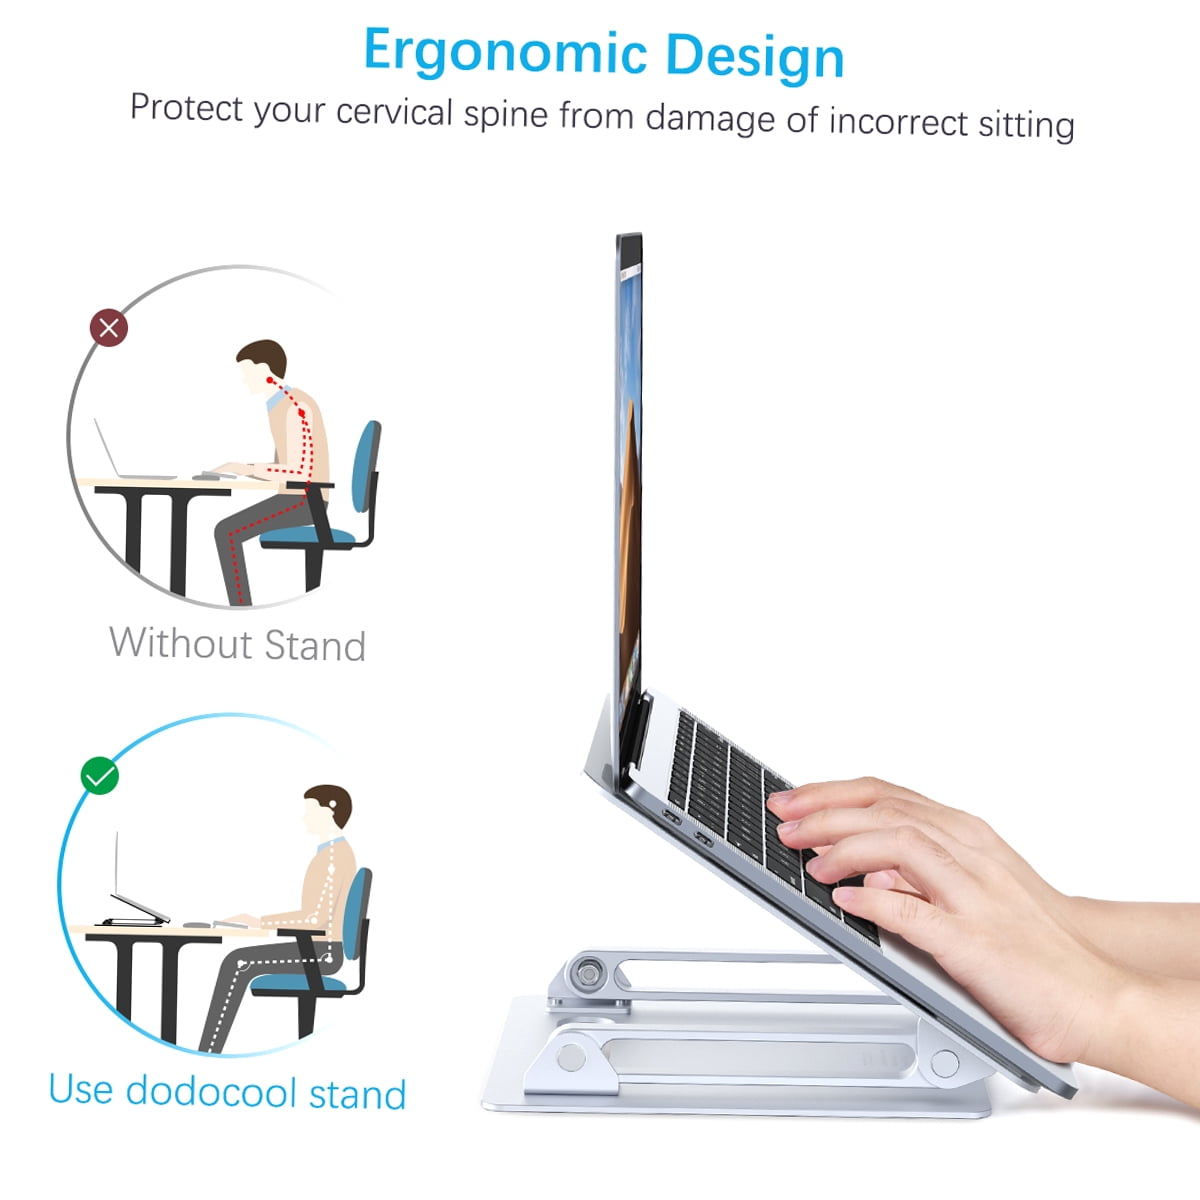 Adjustable Laptop Stand,PATIDO Aluminum Laptop Computer Stand Rriser&Multi-Angle Stand with Heat-Vent to Elevate Laptop Holder Compatible for Mac,Notebook,MacBook Pro/Air,Lenovo,Dell More10-17 Laptop 